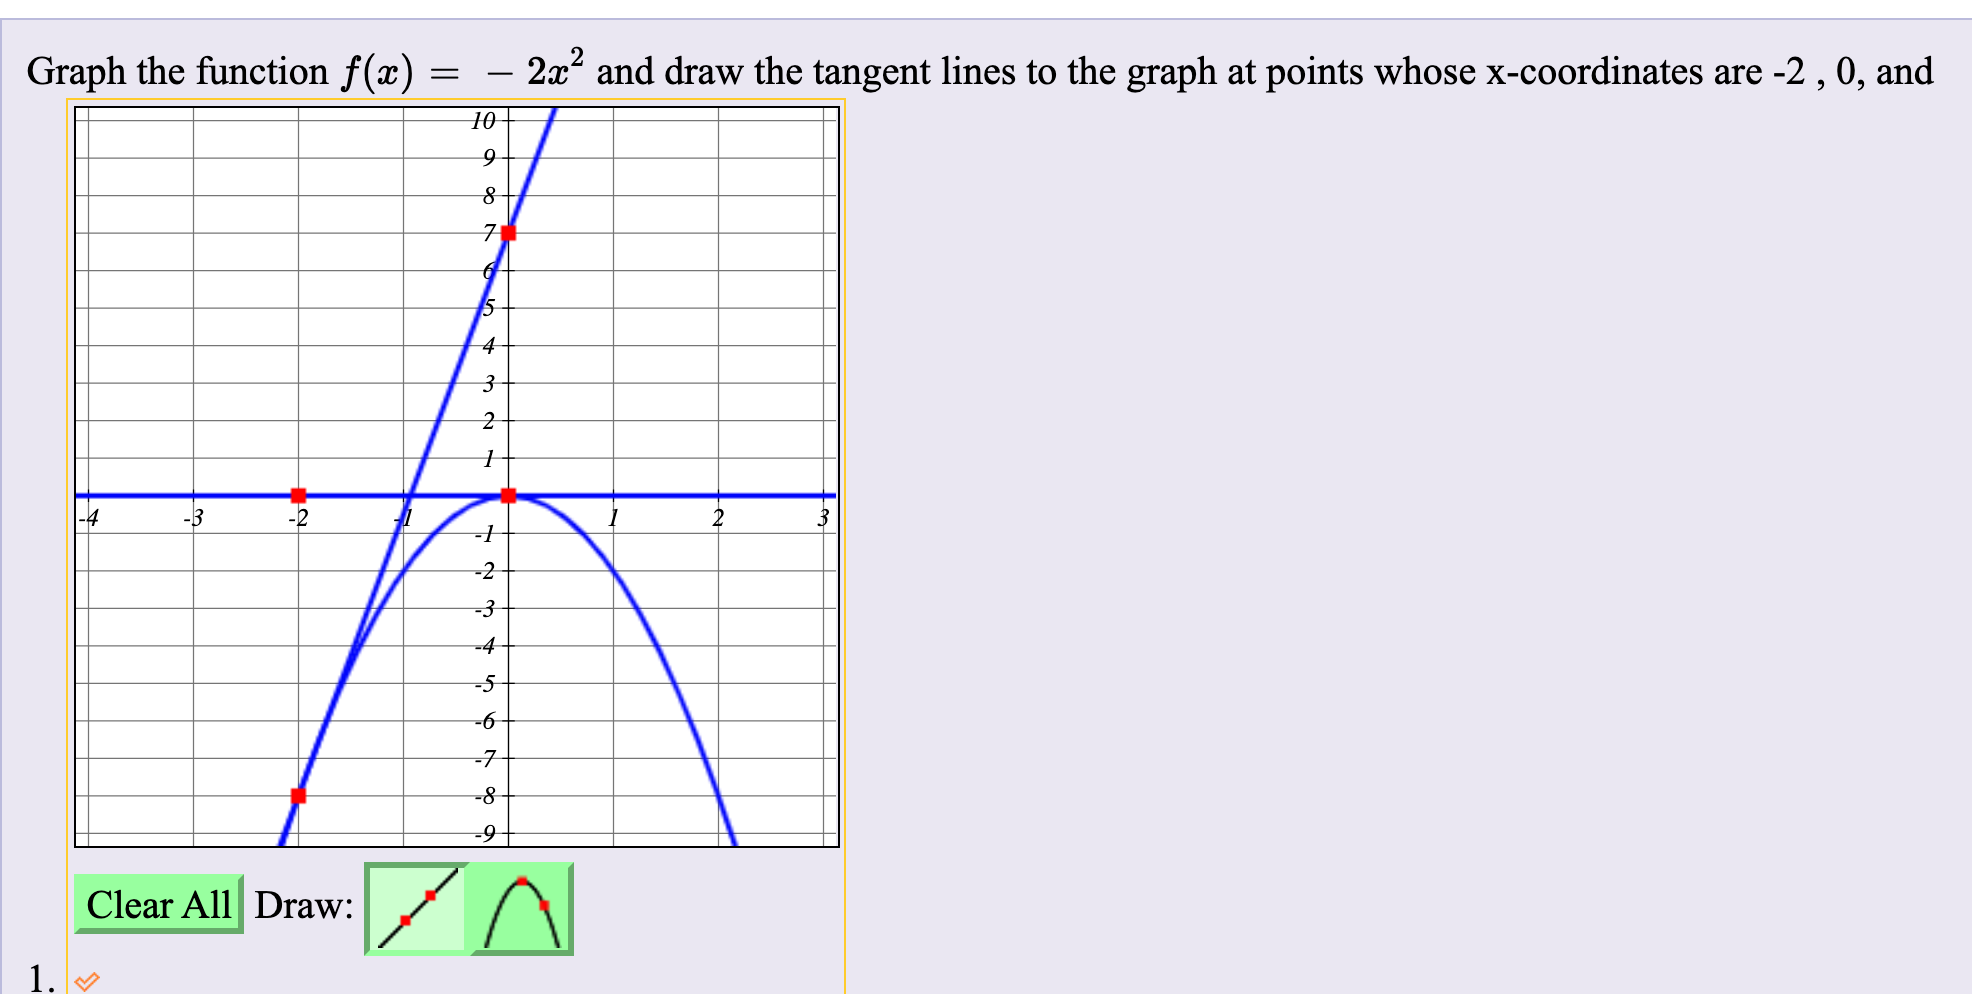 Graph the function f(x)
2x and draw the tangent lines to the graph at points whose x-coordinates are -2 , 0, and
1ю
|-4
-3
-2
-2
-3
-4
-5
-6
-7
-8
Clear All Draw:
1.
